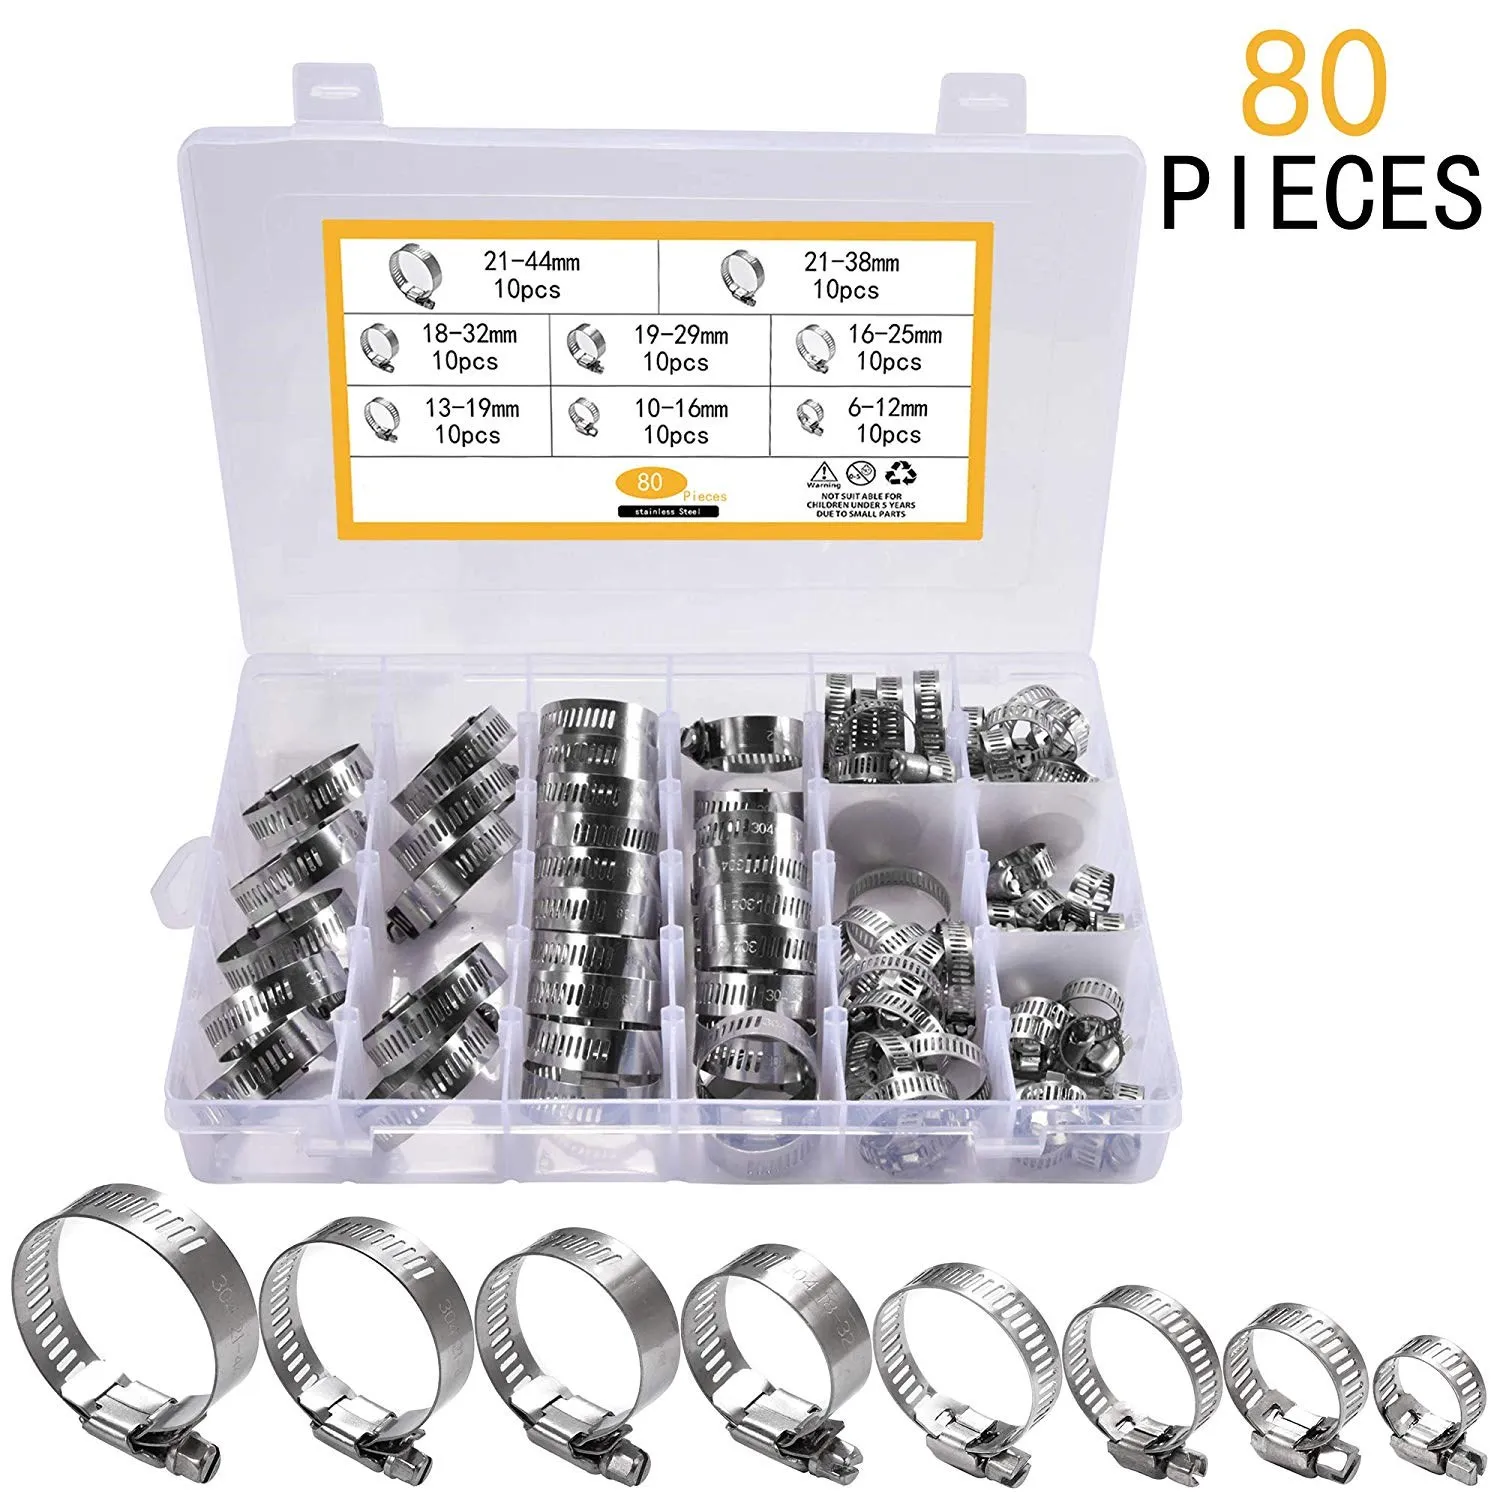 

Hose Clamps Assortment 100% 304 Stainless Steel Adjustable Worm Gear Hose Clamps,Fuel Line Clamp for Plumbing Automotive